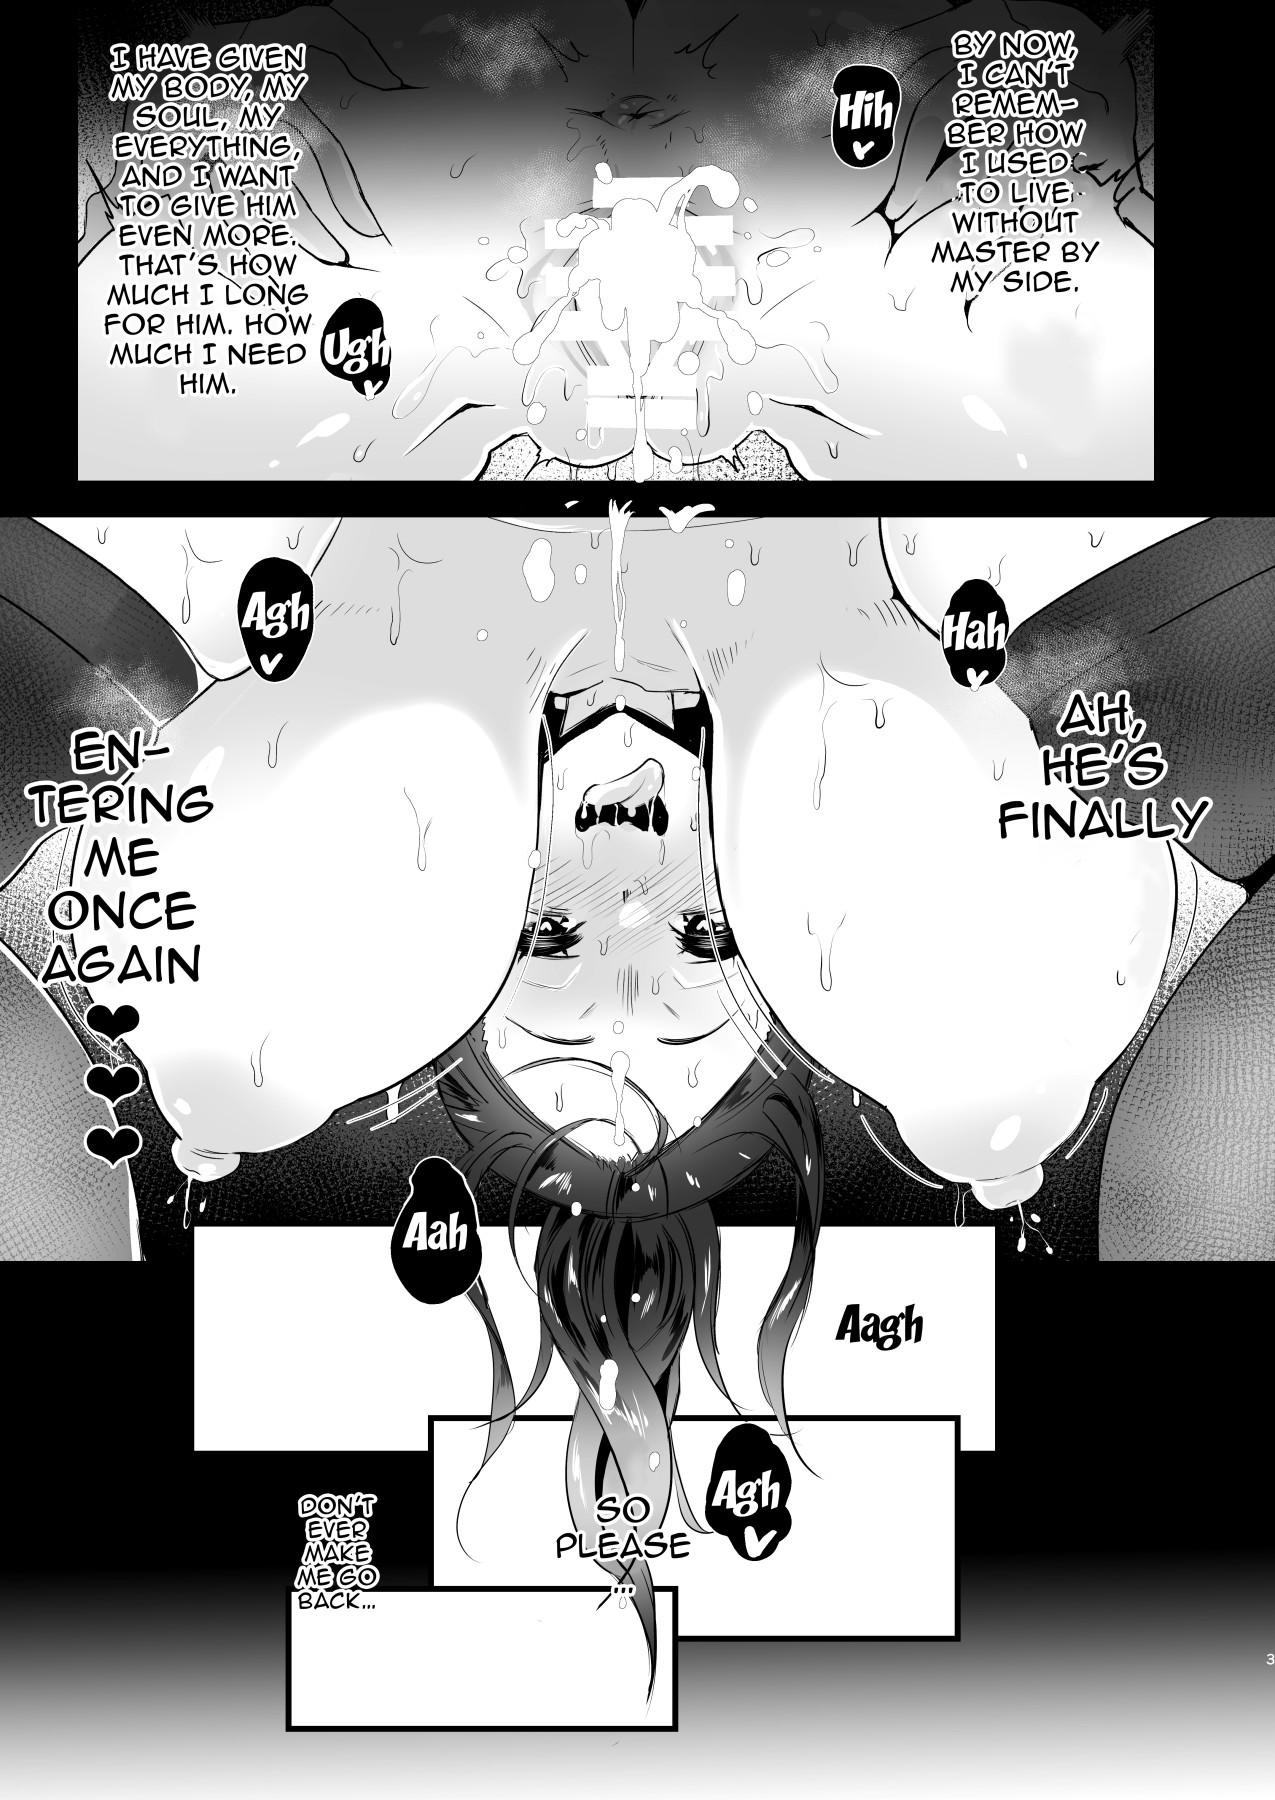 Chaturbate Himawari no Kage | The Other Side of the Sunflower - Original One - Page 2